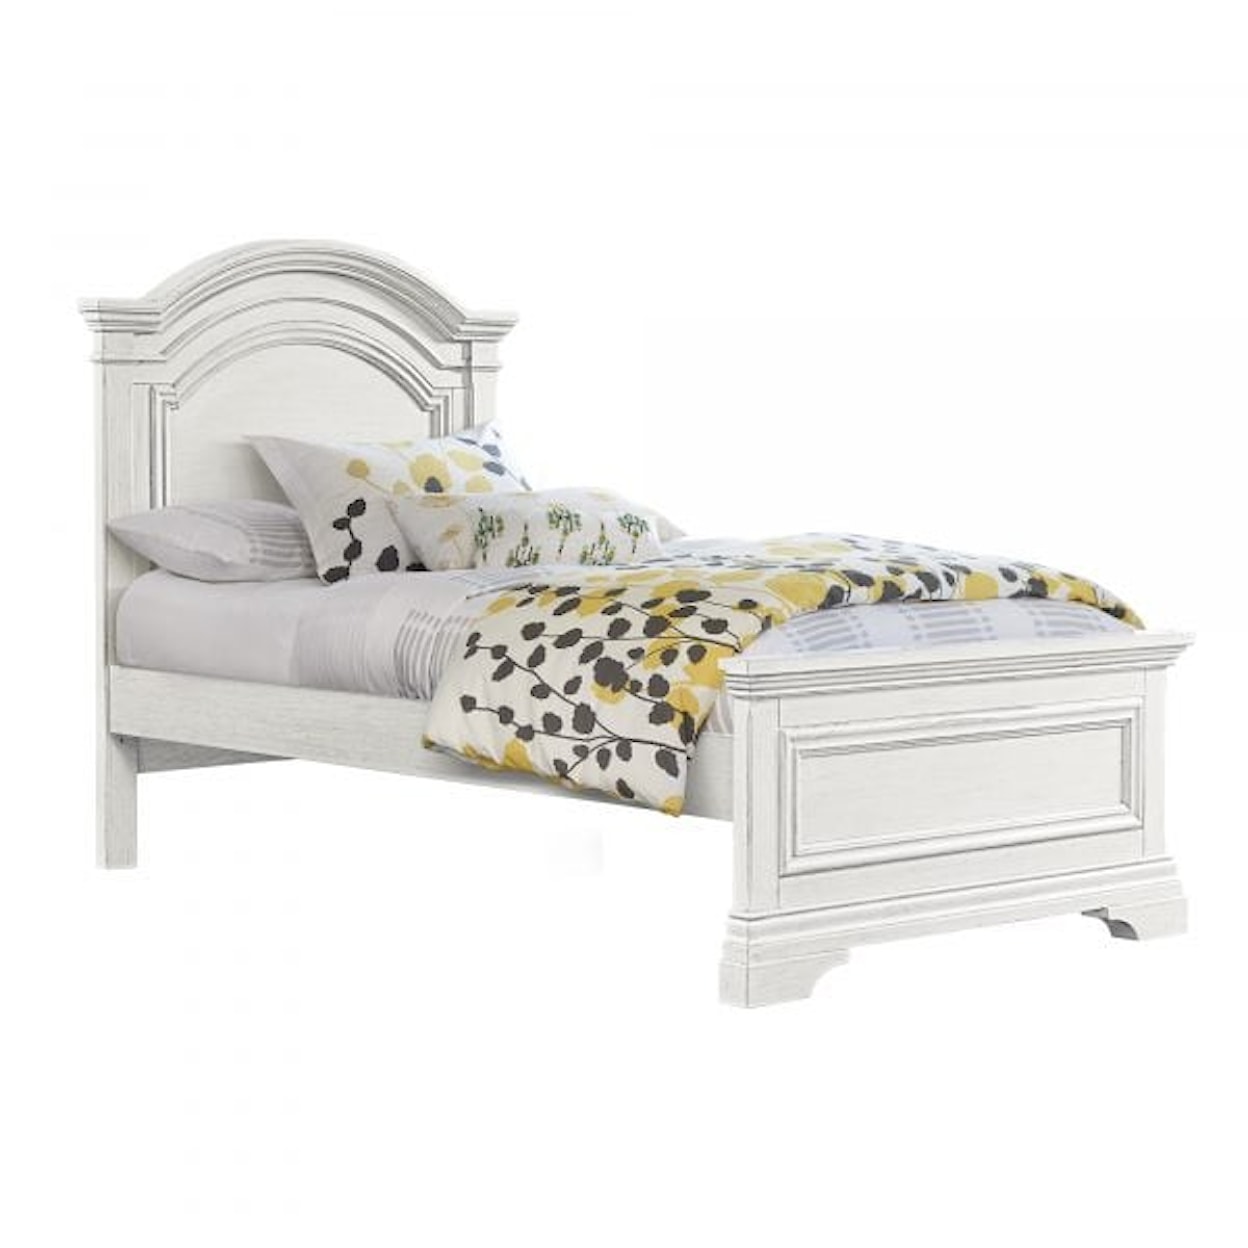 Westwood Design Olivia Arch Top Complete Twin Bed